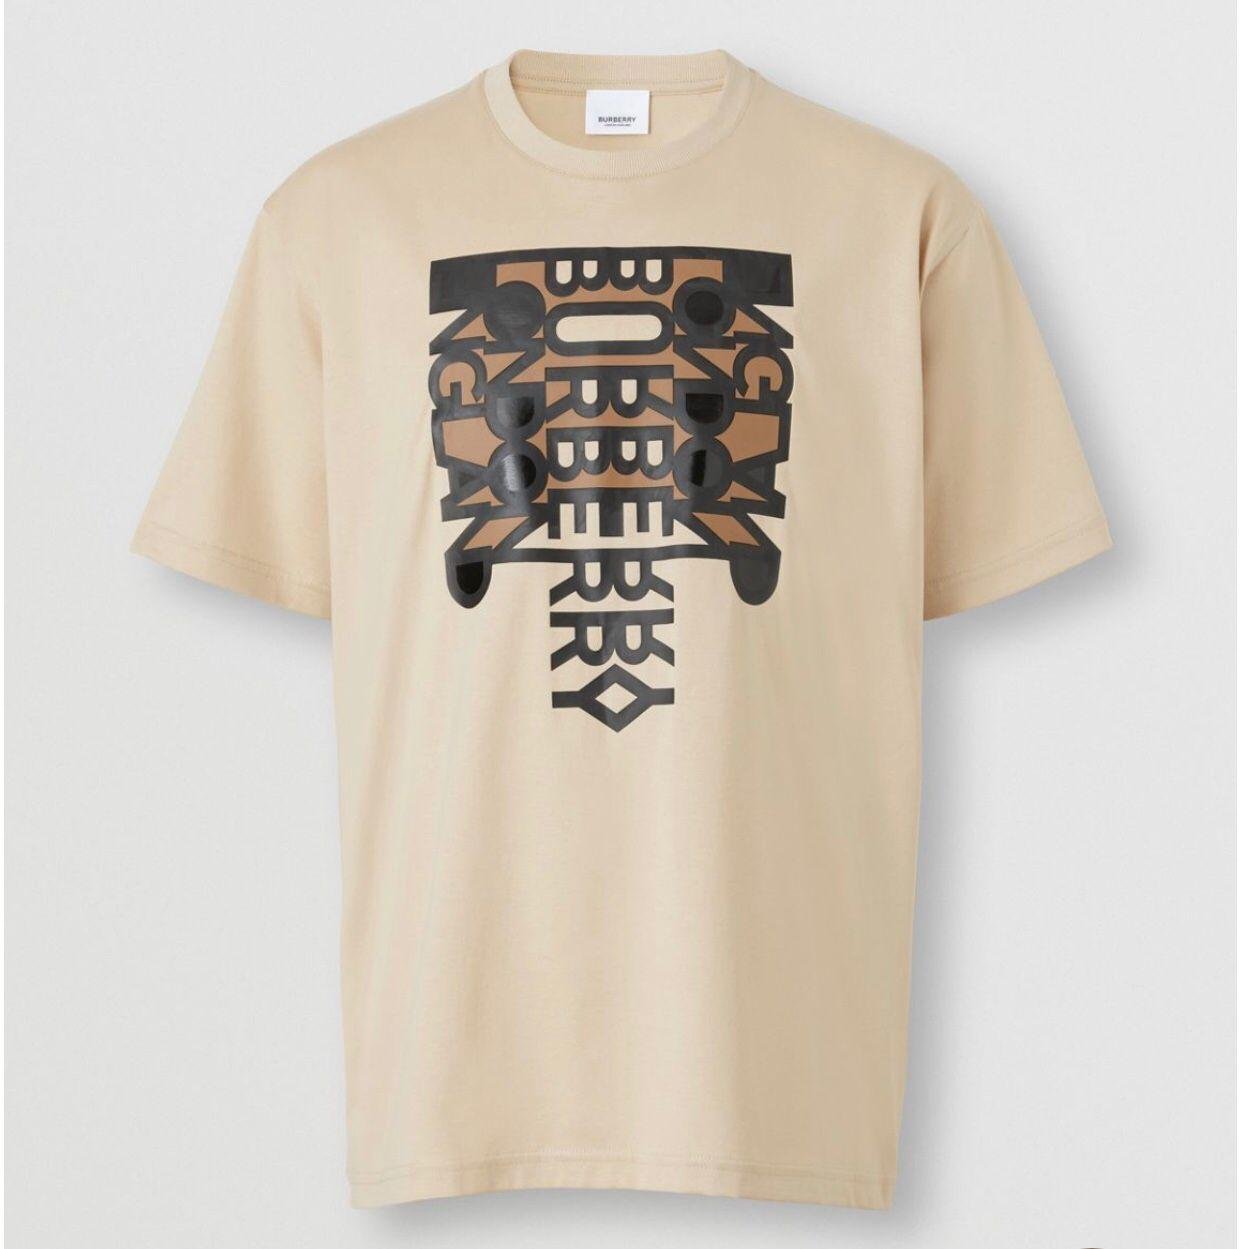          Graphic-logo Cotton T-shirt in Brown for Men casual tee shirts